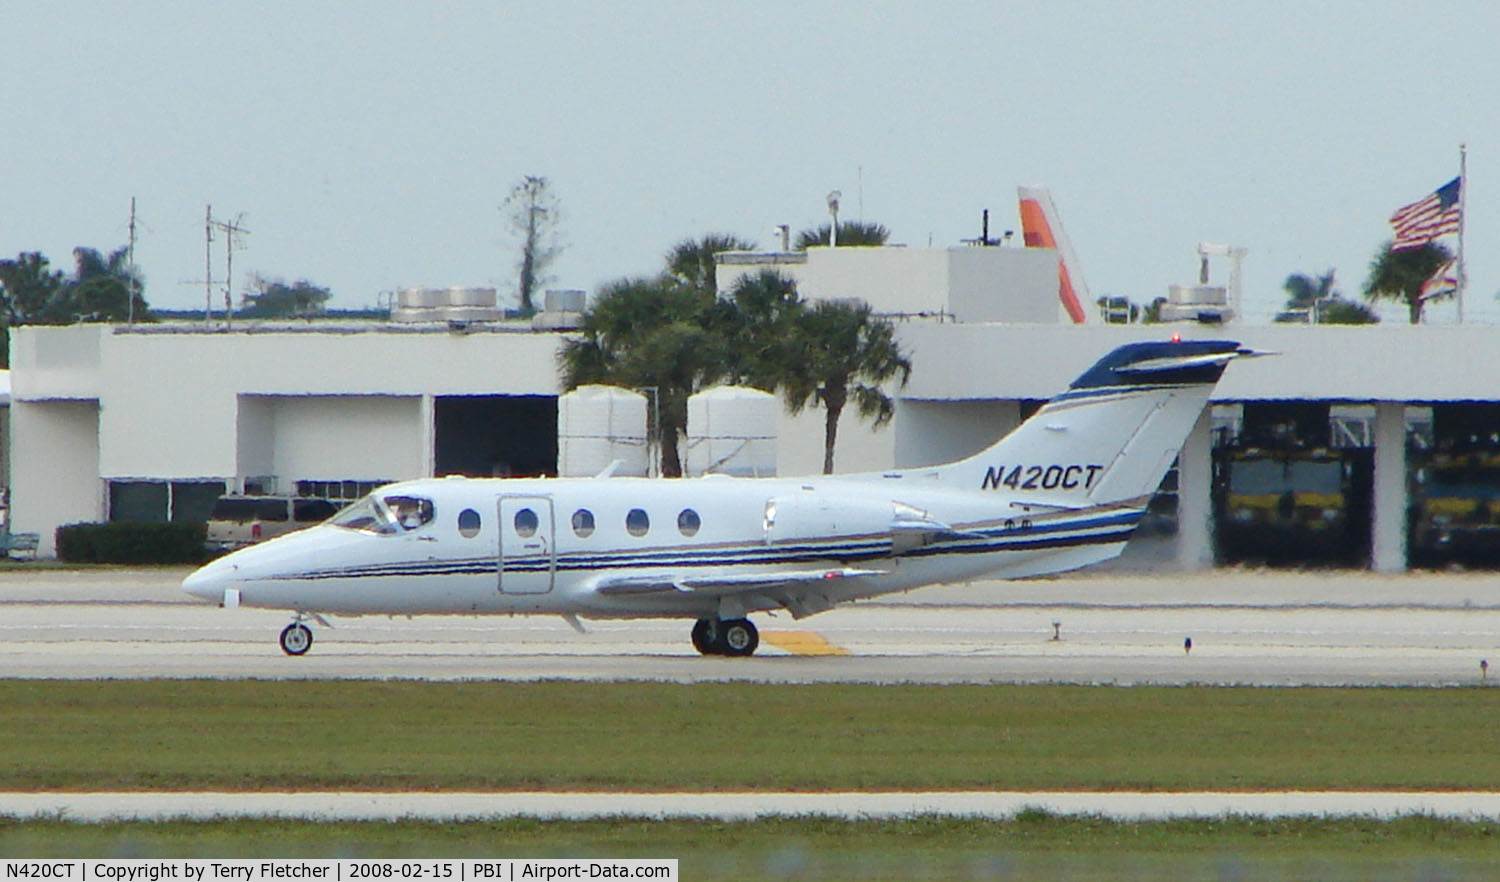 N420CT, 2007 Raytheon Beechjet 400A C/N RK-517, The business aircraft traffic at West Palm Beach on the Friday before President's Day always provides the aviation enthusiast / photographer with a treat